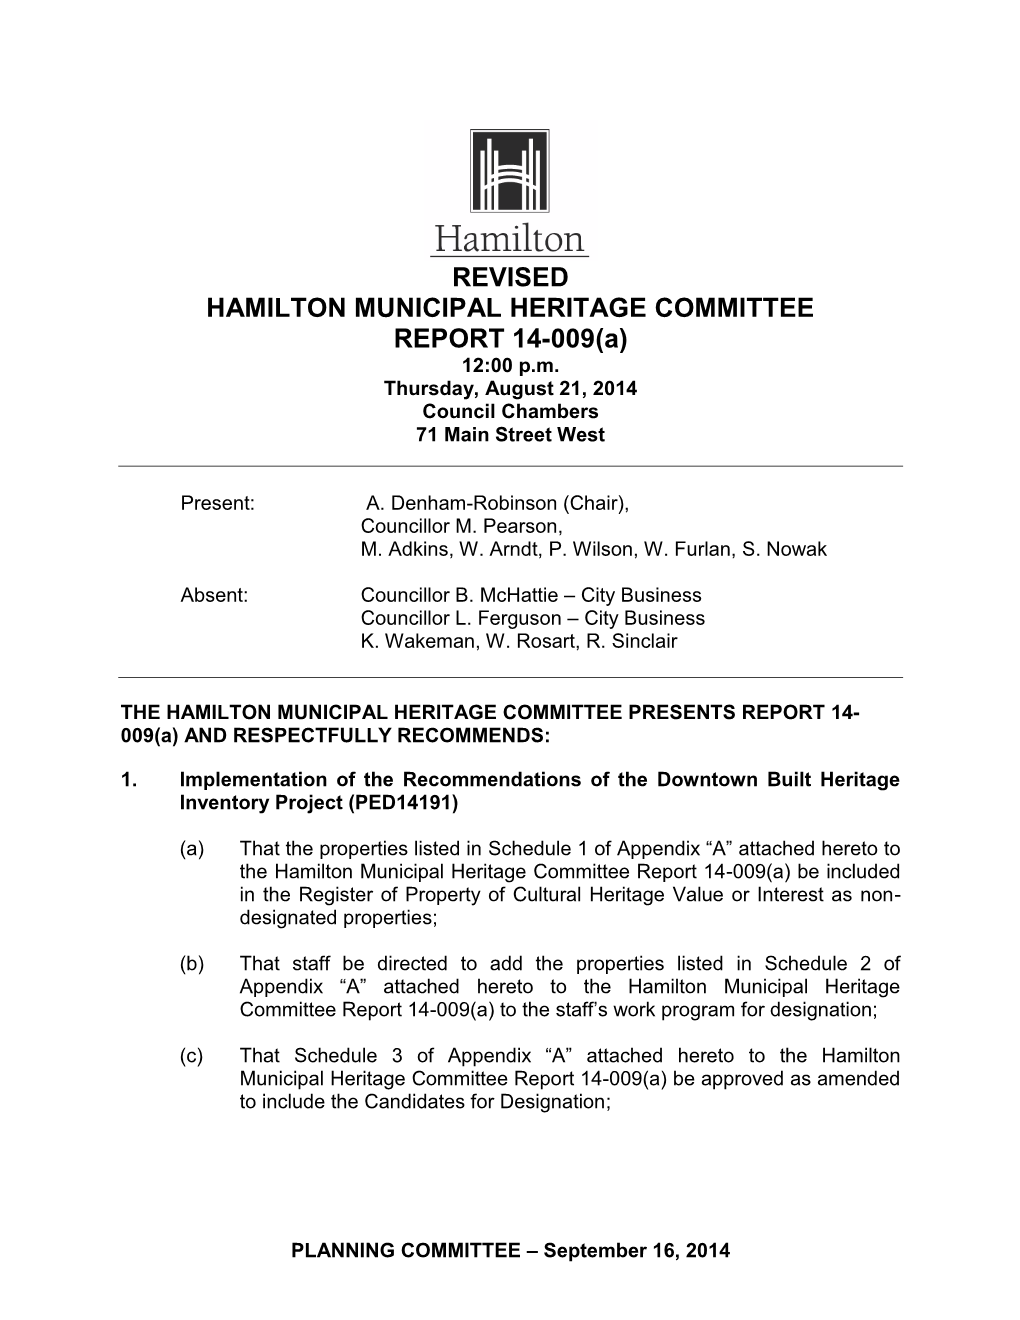 REVISED HAMILTON MUNICIPAL HERITAGE COMMITTEE REPORT 14-009(A) 12:00 P.M